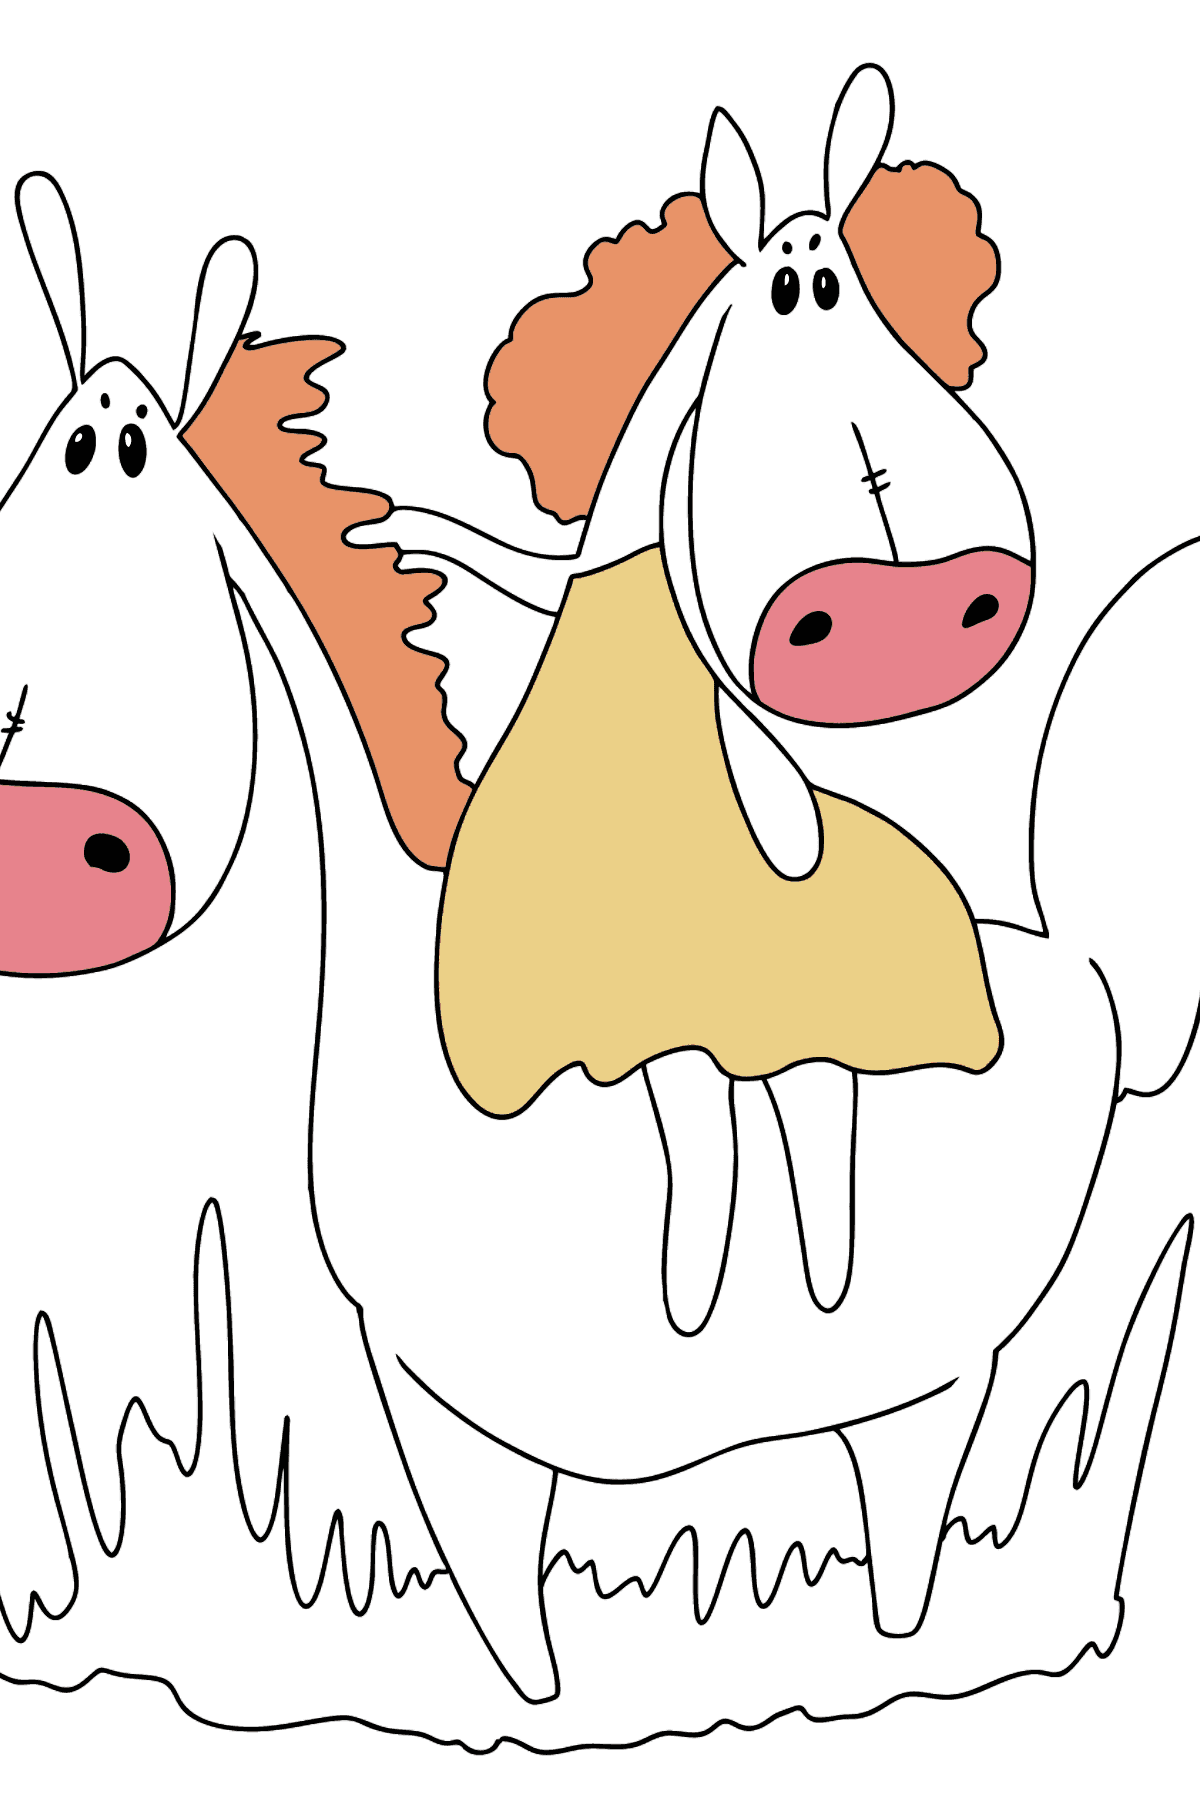 Simple coloring page a horse for a walk - Coloring Pages for Kids